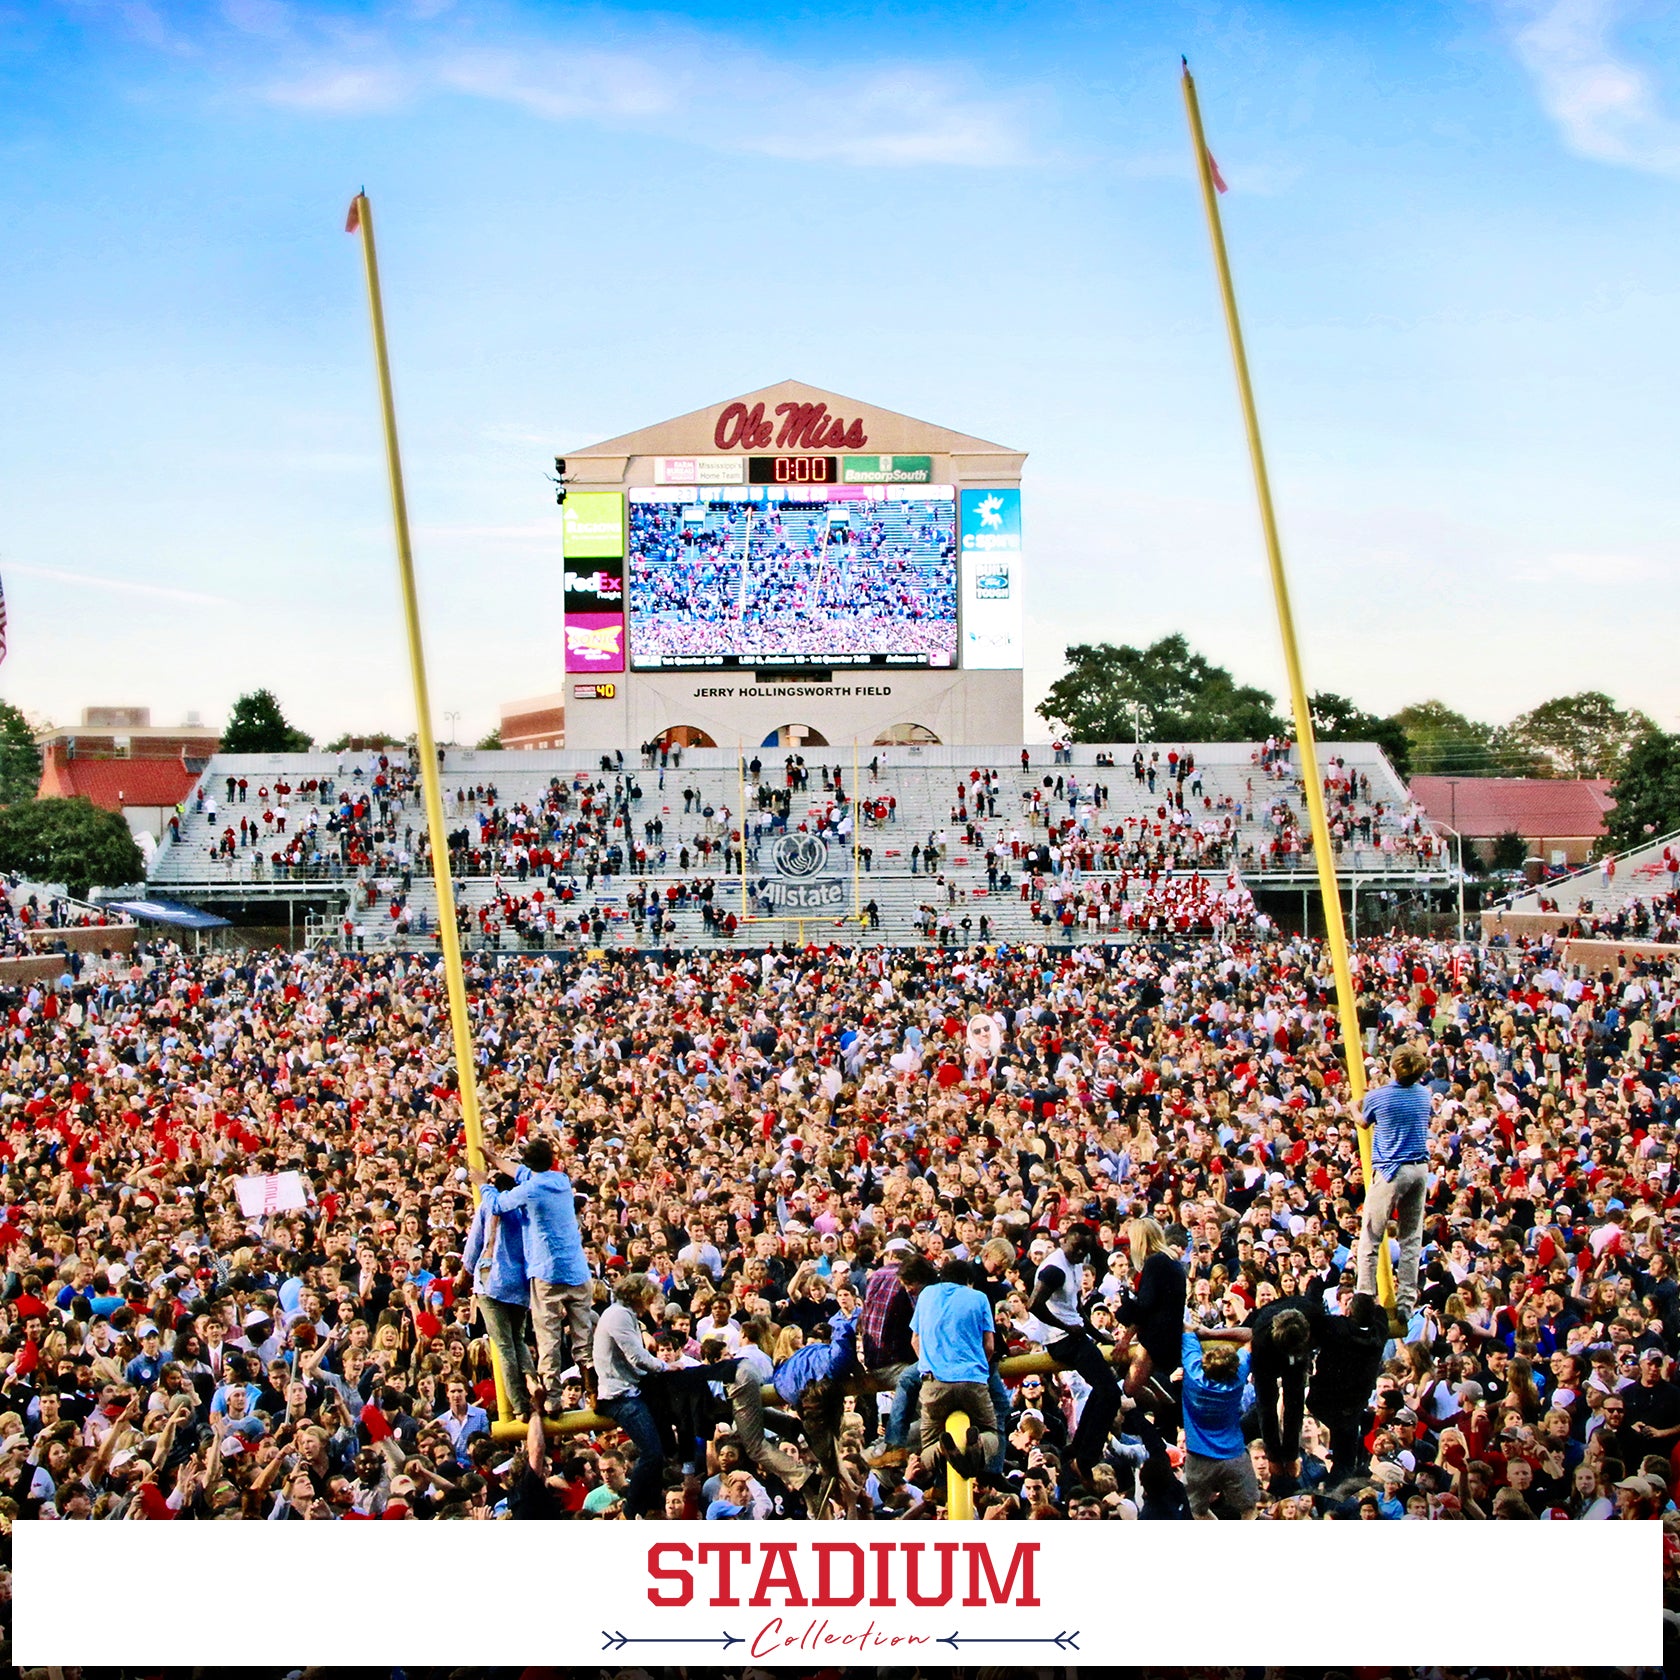 Ole Miss Rebels - Stadium Images Wall Art - Available as Canvas, Wood, Poster, Metal, Acrylic, Peel and Stick and PVC